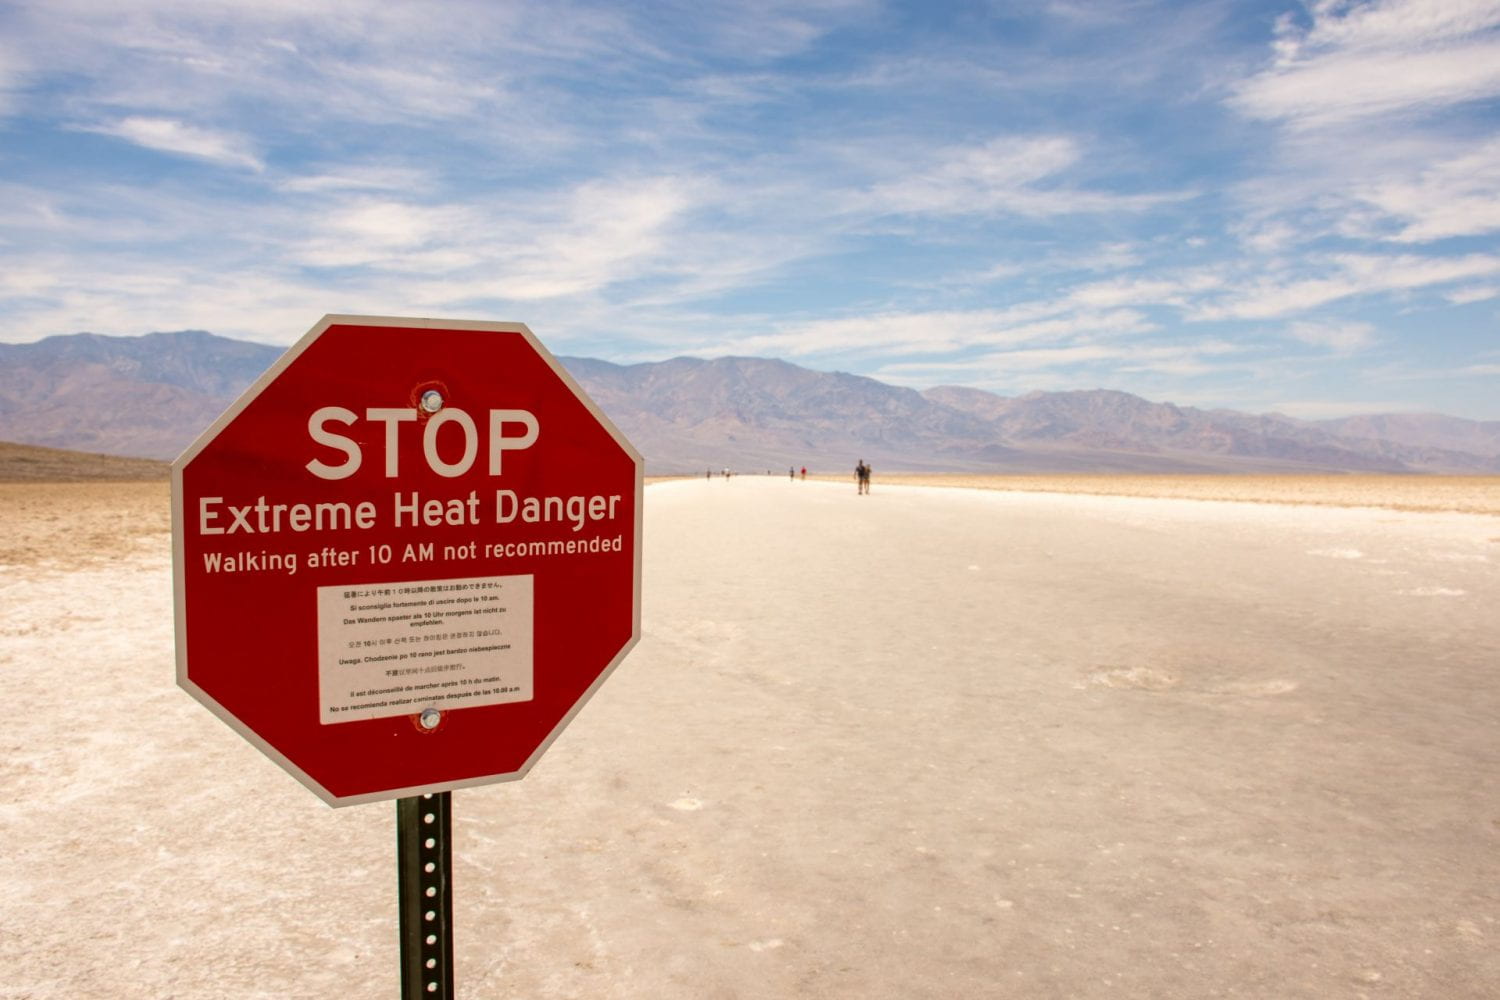 Stop Sign with extreme heat warning in the middle of a desert.